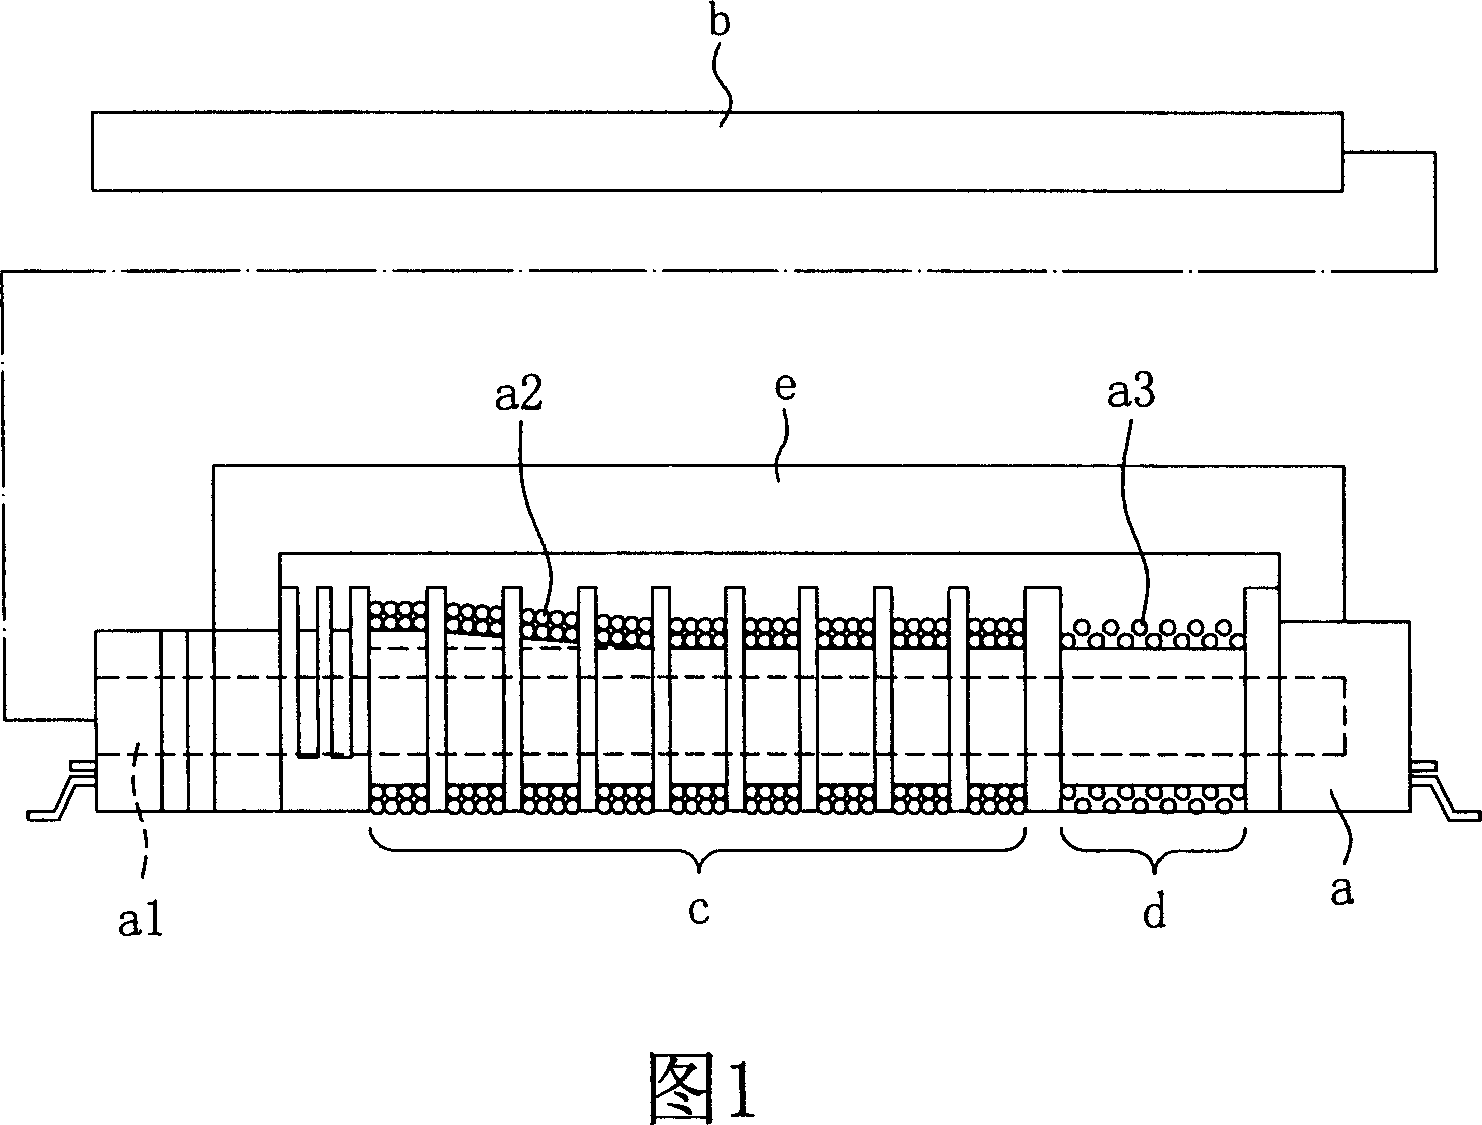 High voltage transformer for controlling the leakage inductance